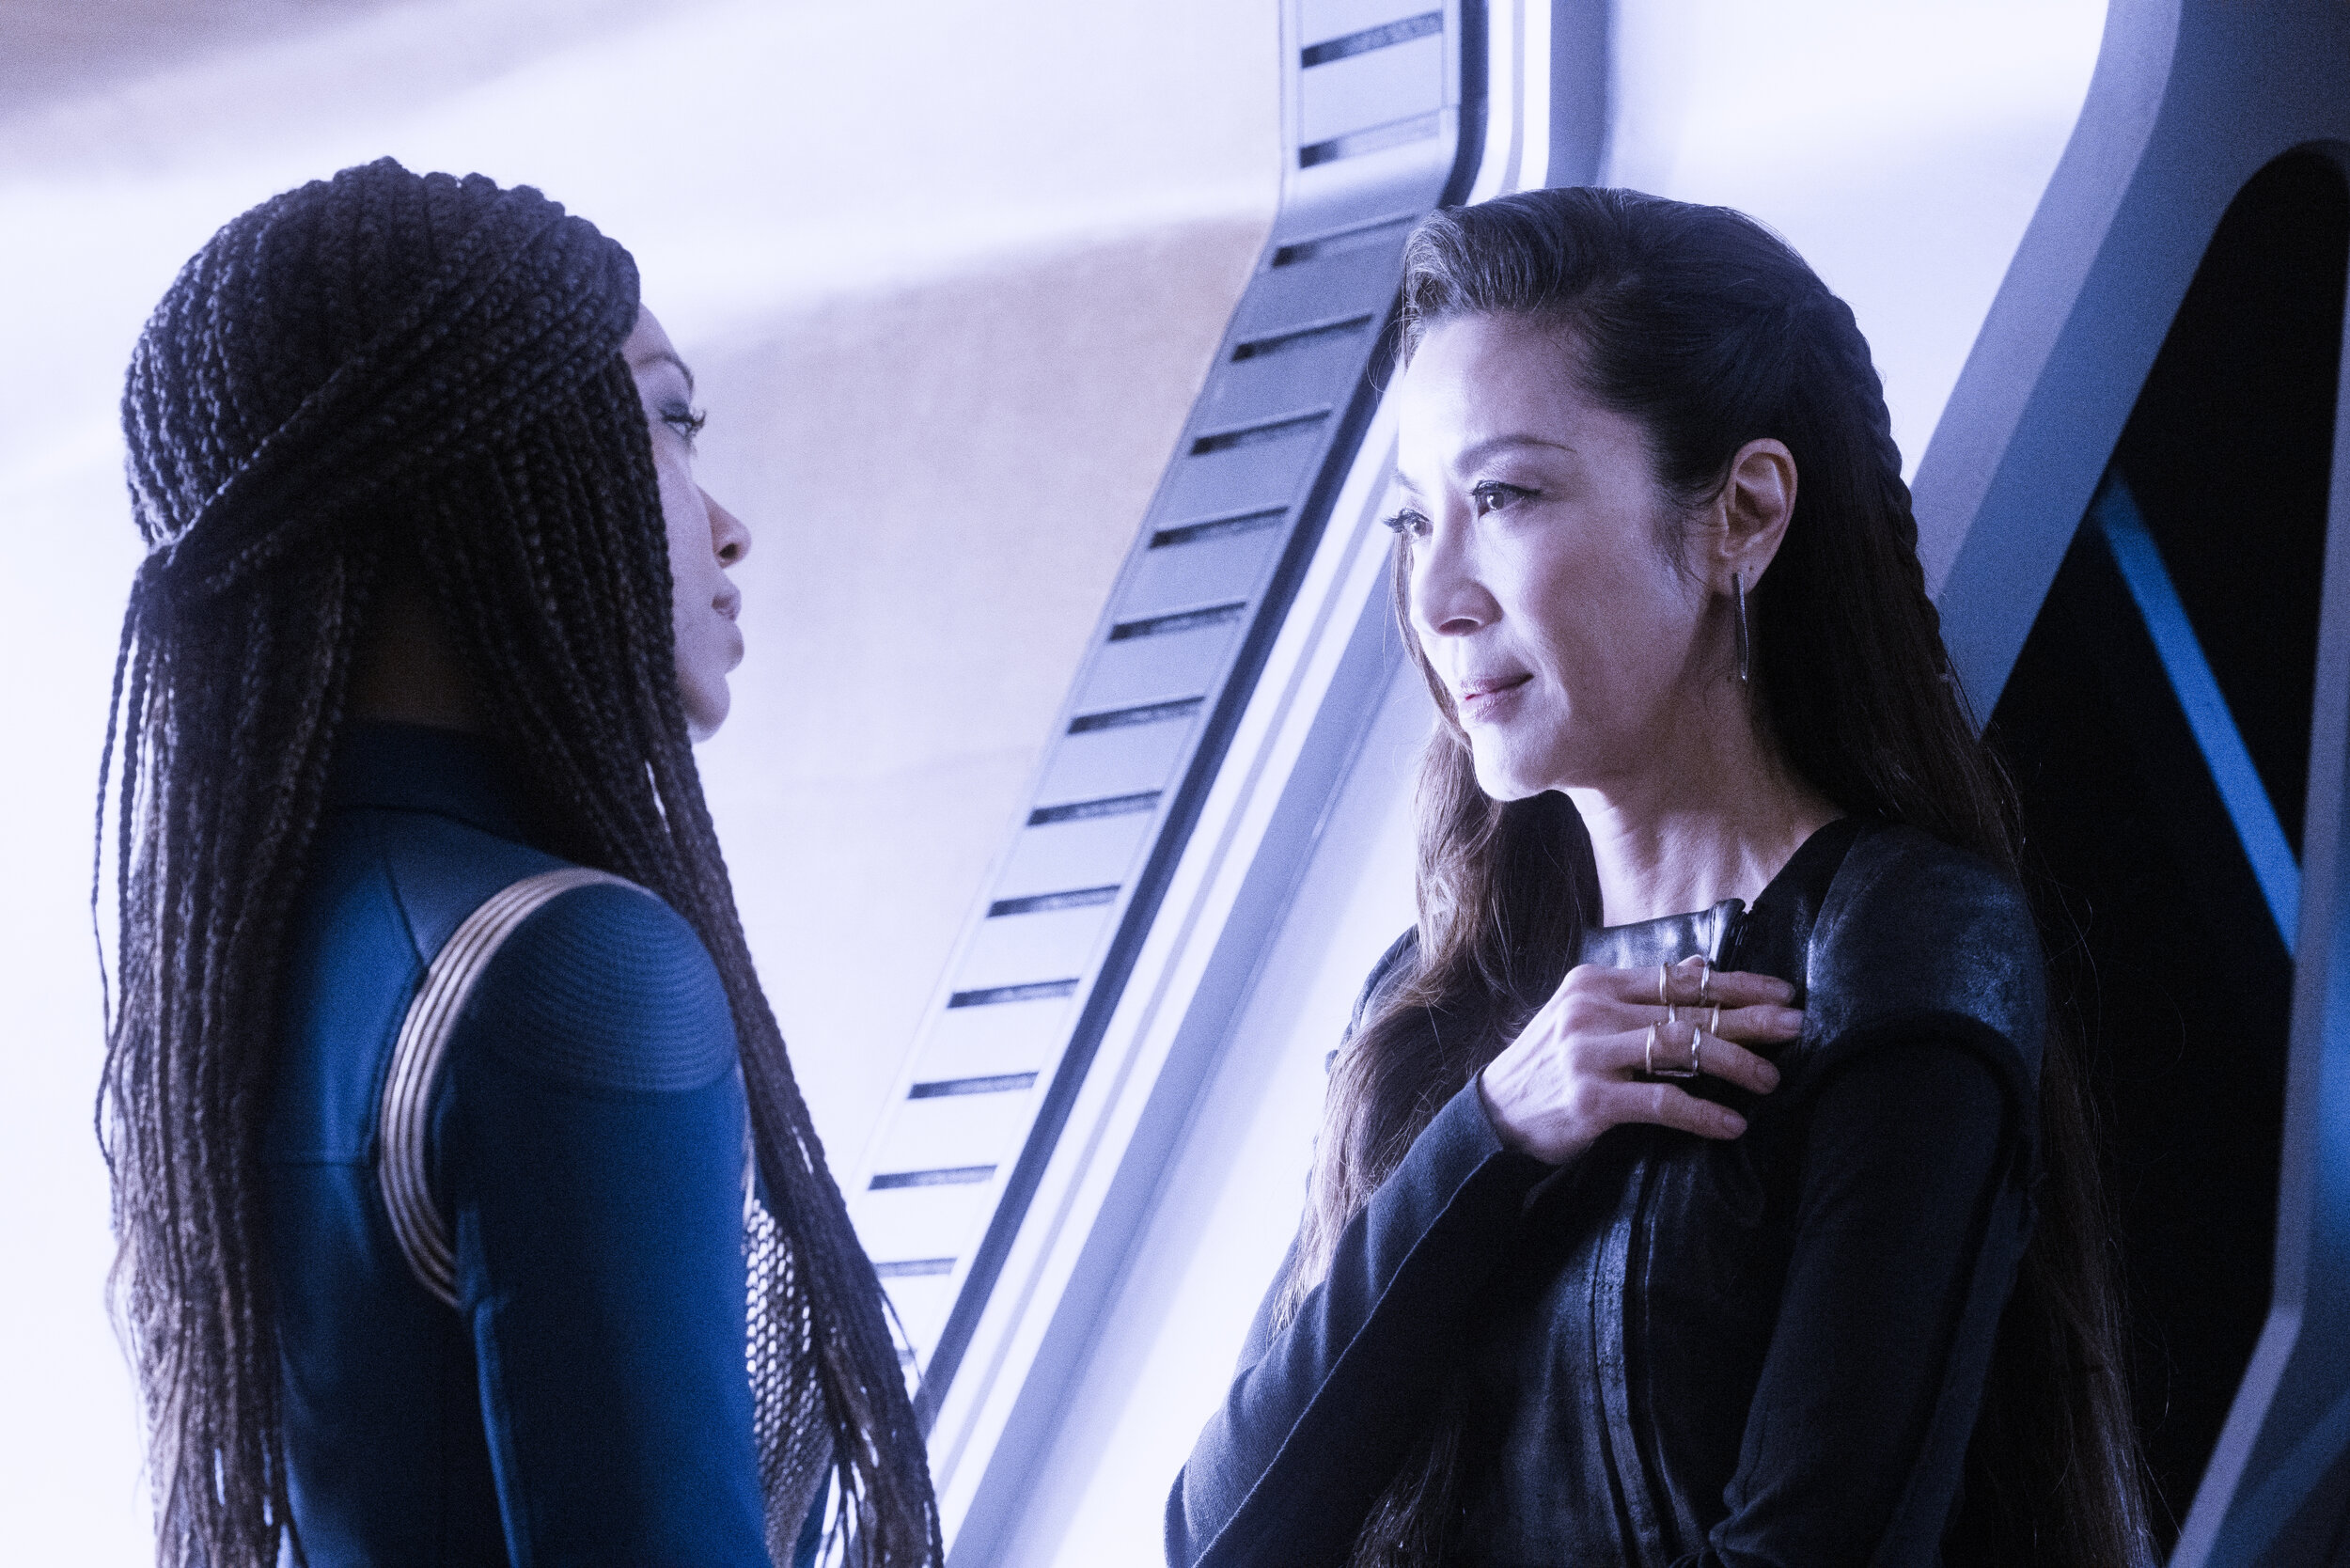   "Scavengers" -- Ep#306 -- Pictured: Sonequa Martin-Green as Burnham and Michelle Yeoh as Georgiou of the CBS All Access series STAR TREK: DISCOVERY. Photo Cr: Michael Gibson/CBS ©2020 CBS Interactive, Inc. All Rights Reserved.  